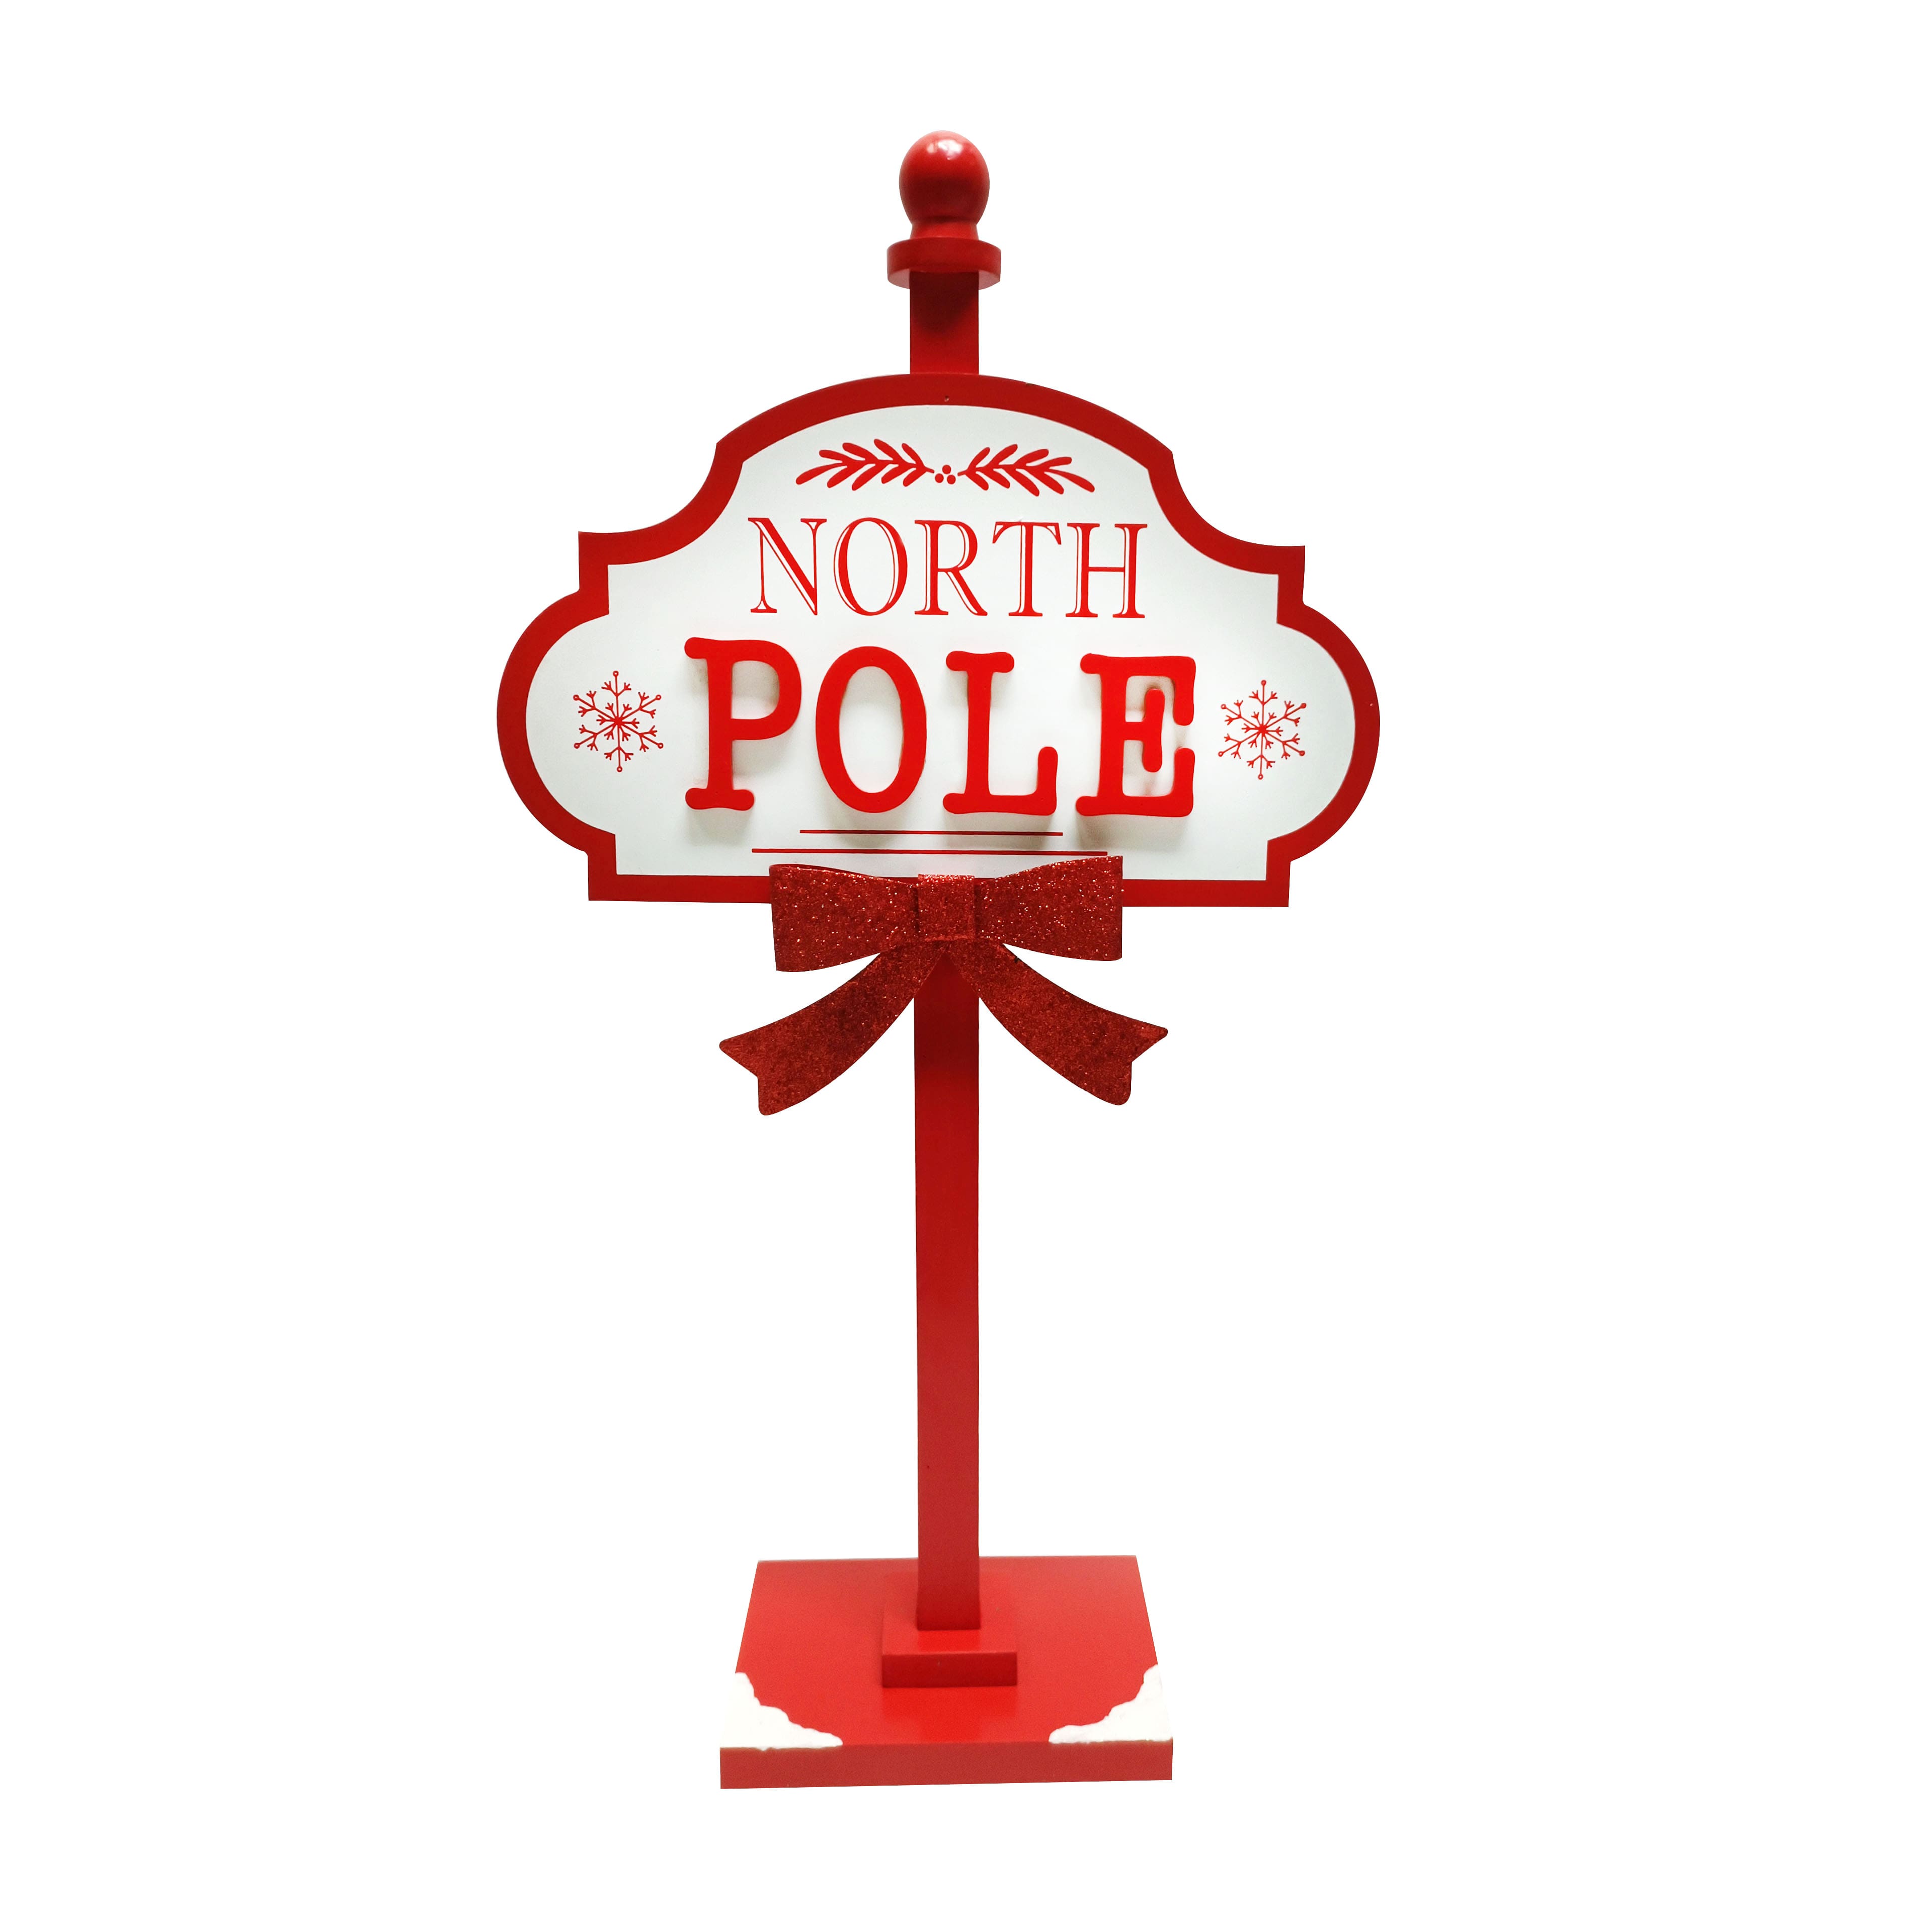 Matching Pole Magnet with Acrylic Adhesive - Discount Magnet